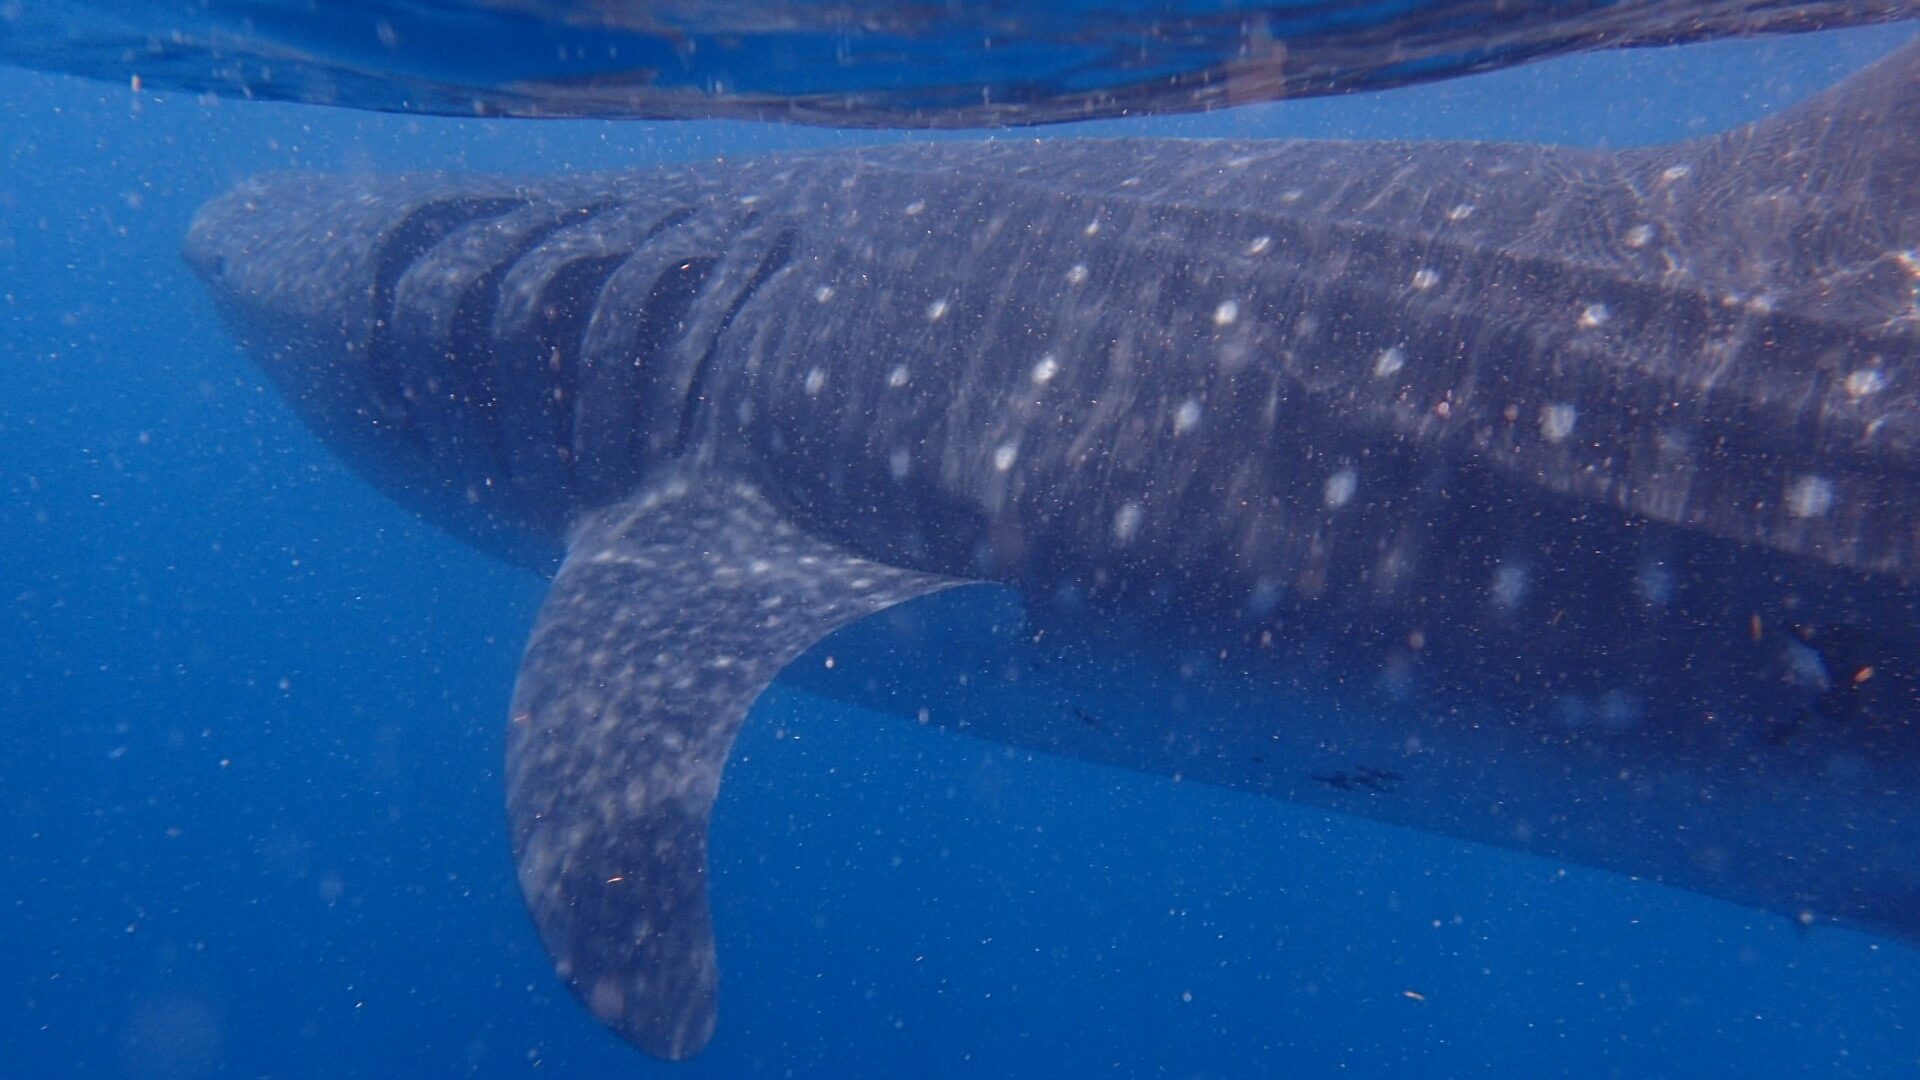 Author's close up underwater shot of a huge whale shark in blue water, cloudy with plankton off the coast of Mexico's Isla Mujeres.